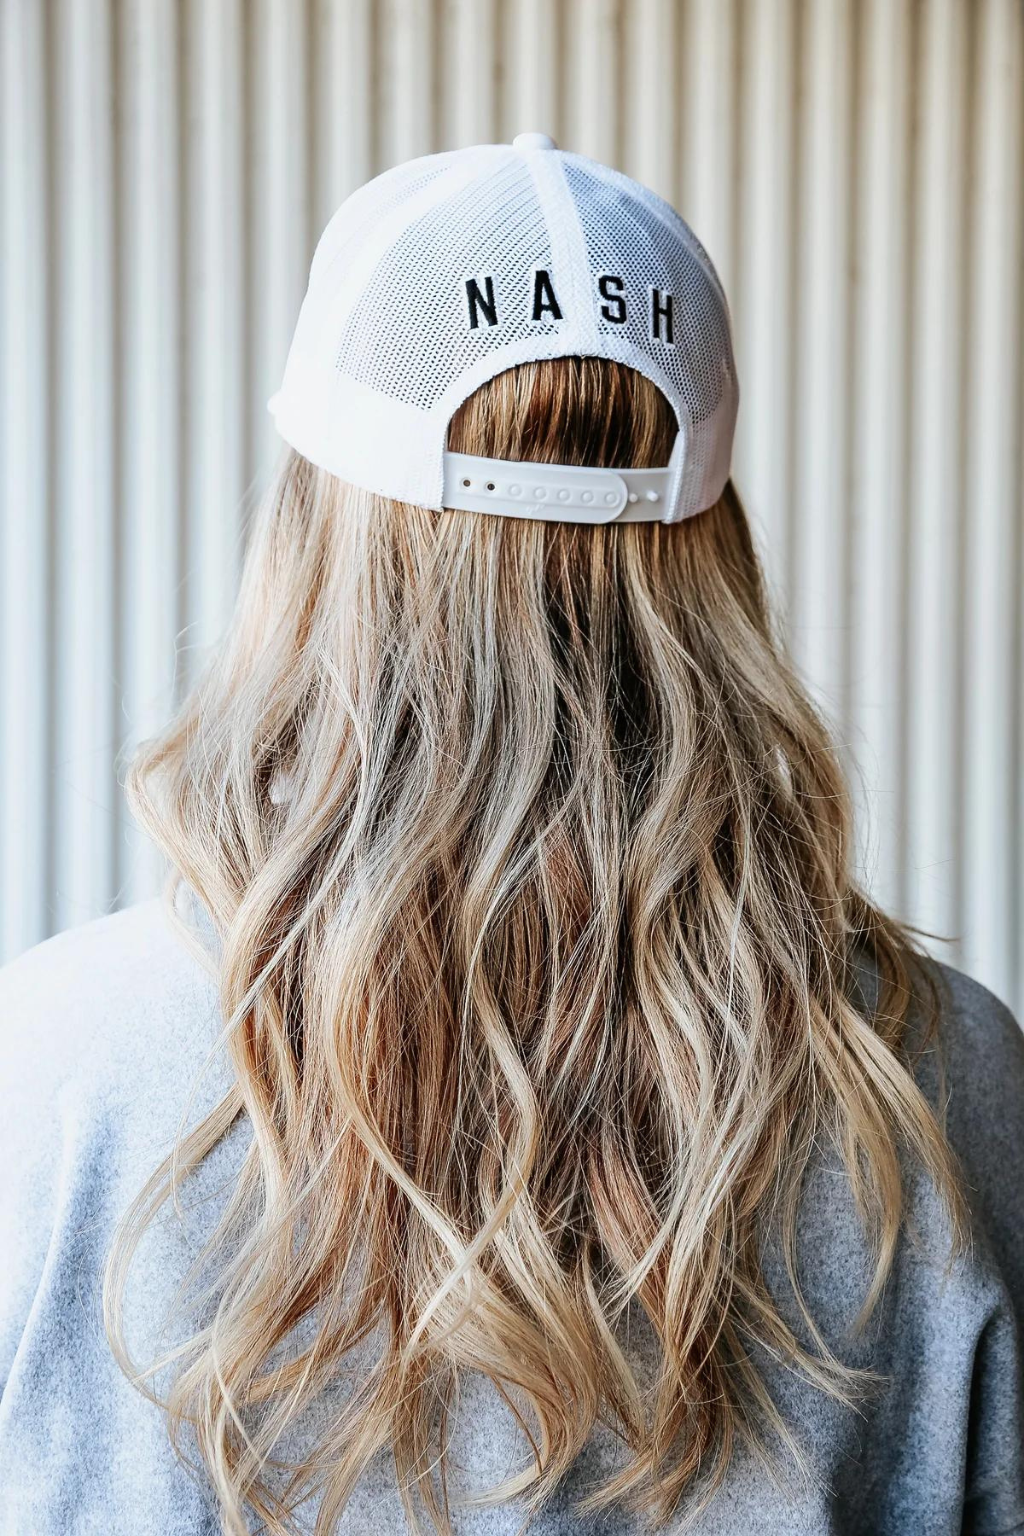 Nash Collection Iconic Trucker Hat White